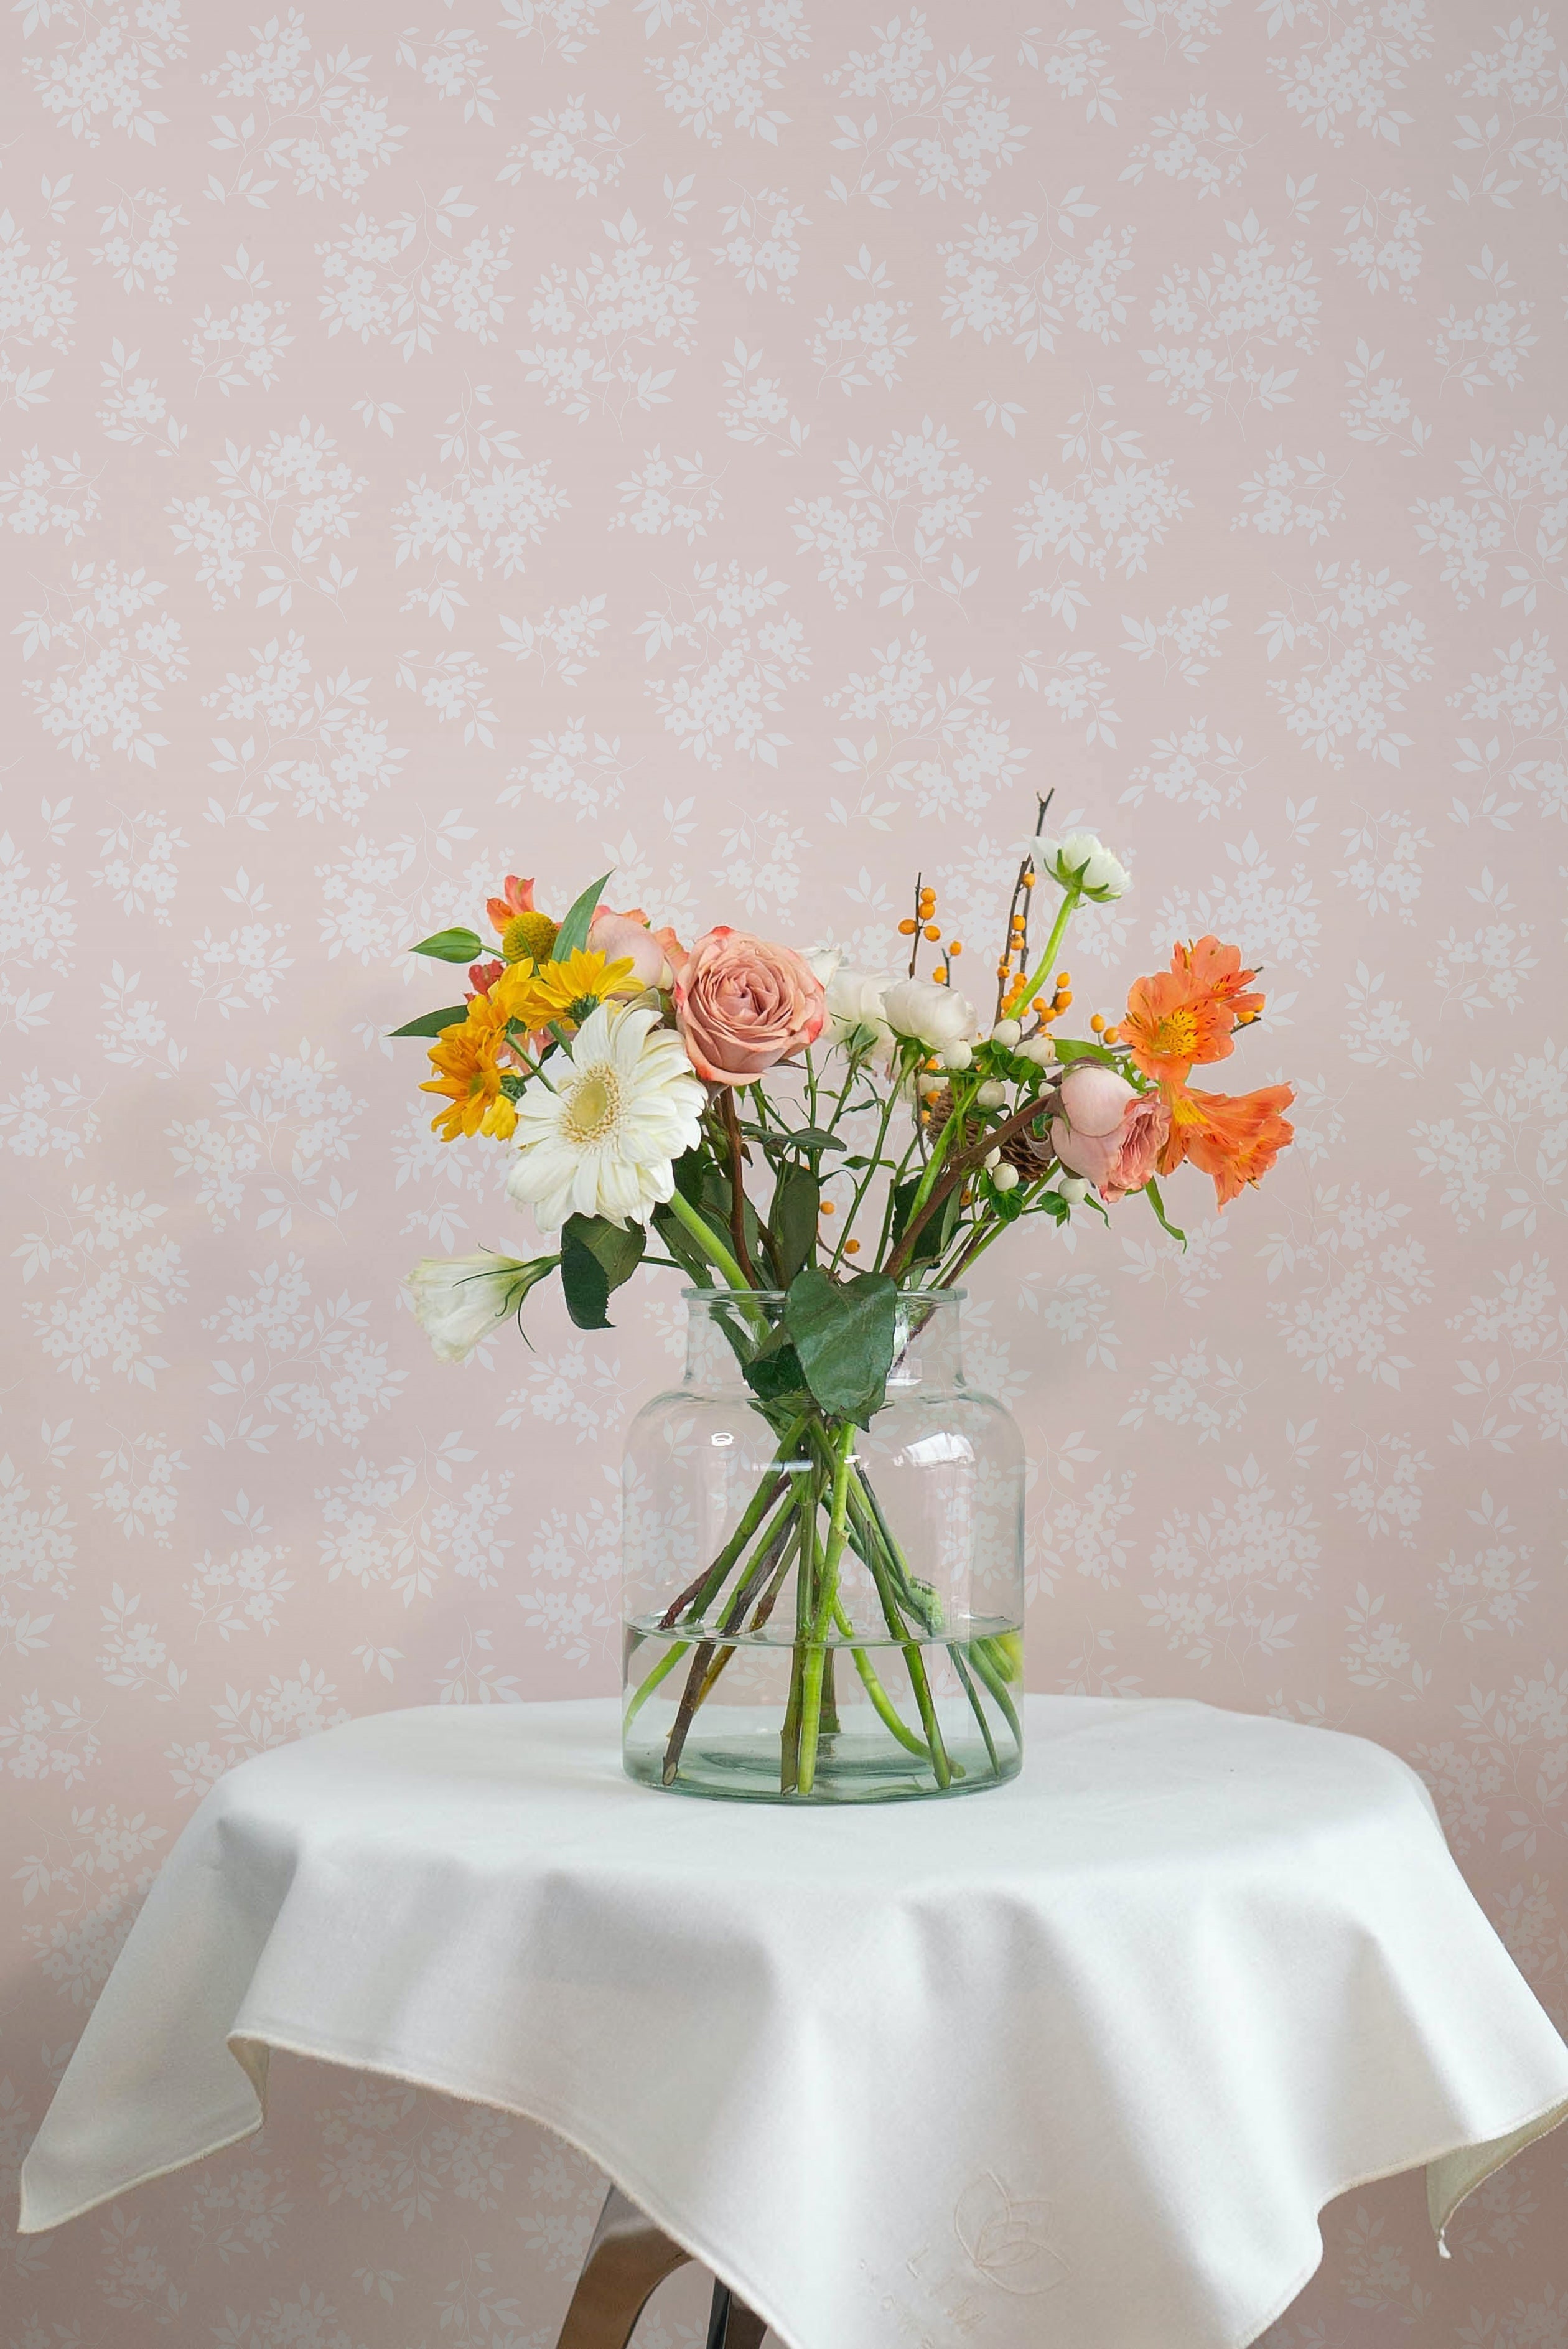 A charming still life of a vibrant floral arrangement in a clear glass vase, set against a delicate champagne-colored wallpaper adorned with white floral patterns, enhancing a soft, serene ambiance.